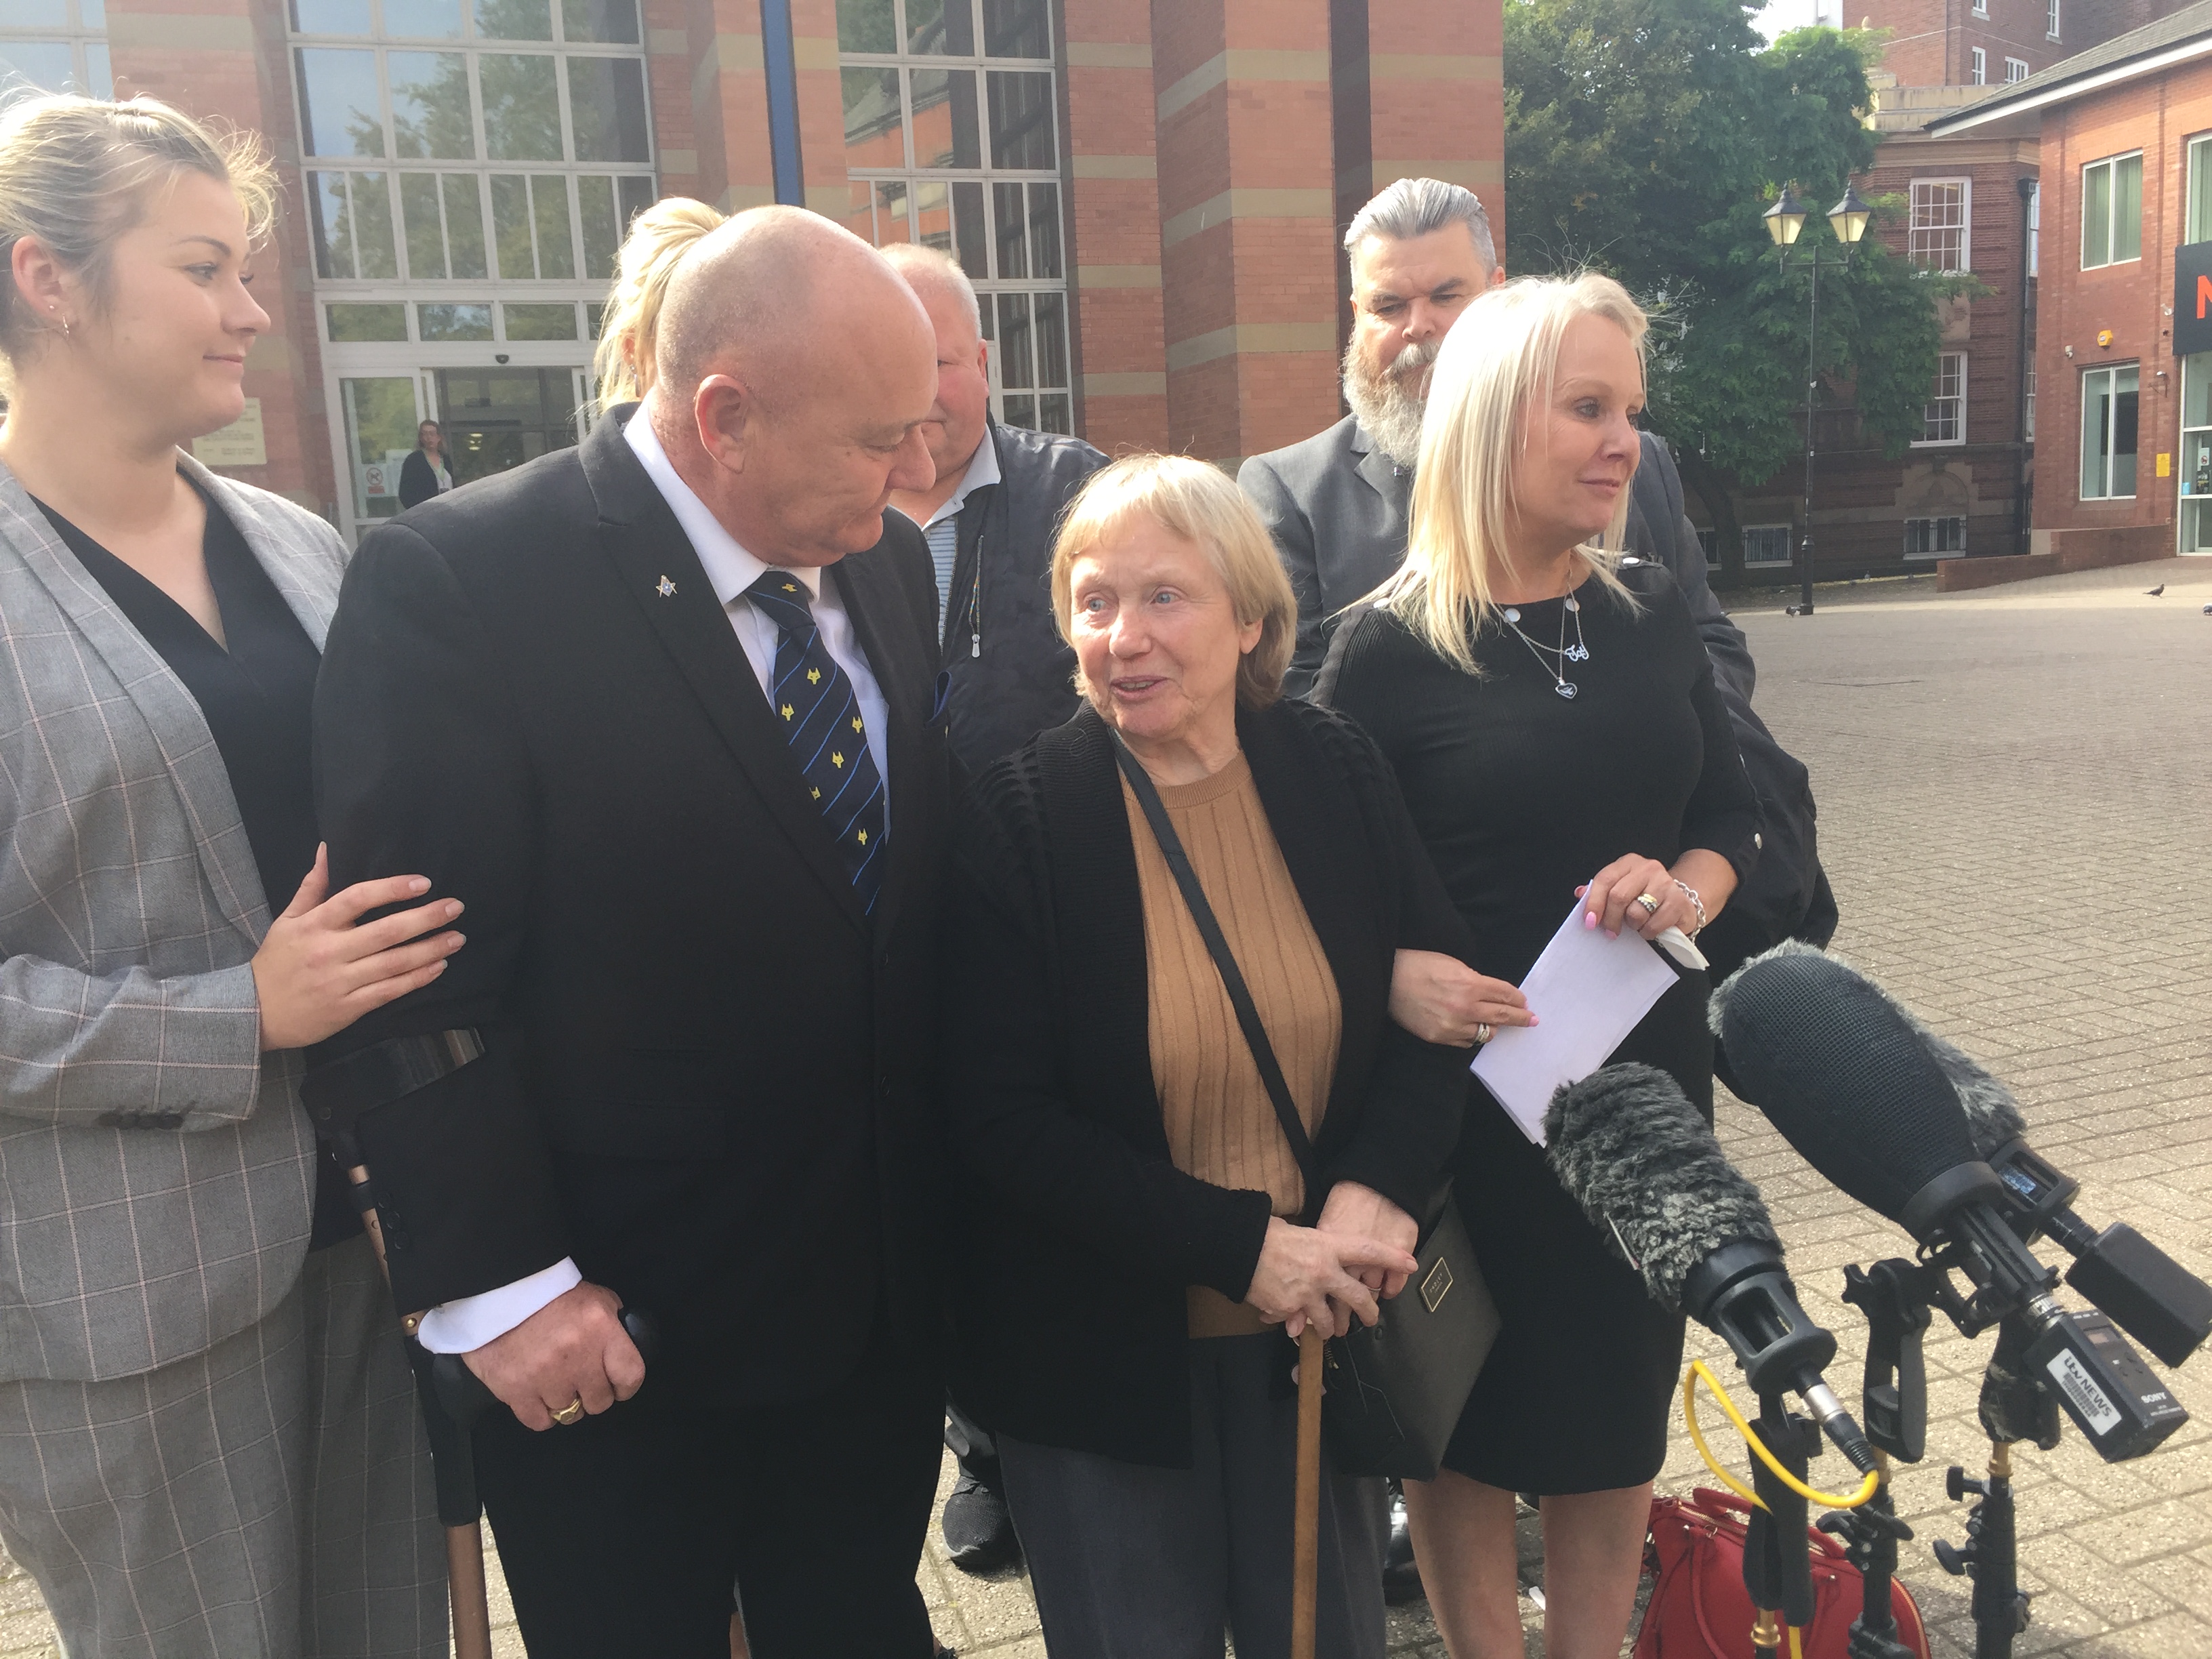 Mavis Eccleston outside Stafford Crown Court after her acquittal, flanked by her daughter Joy and son Kevin